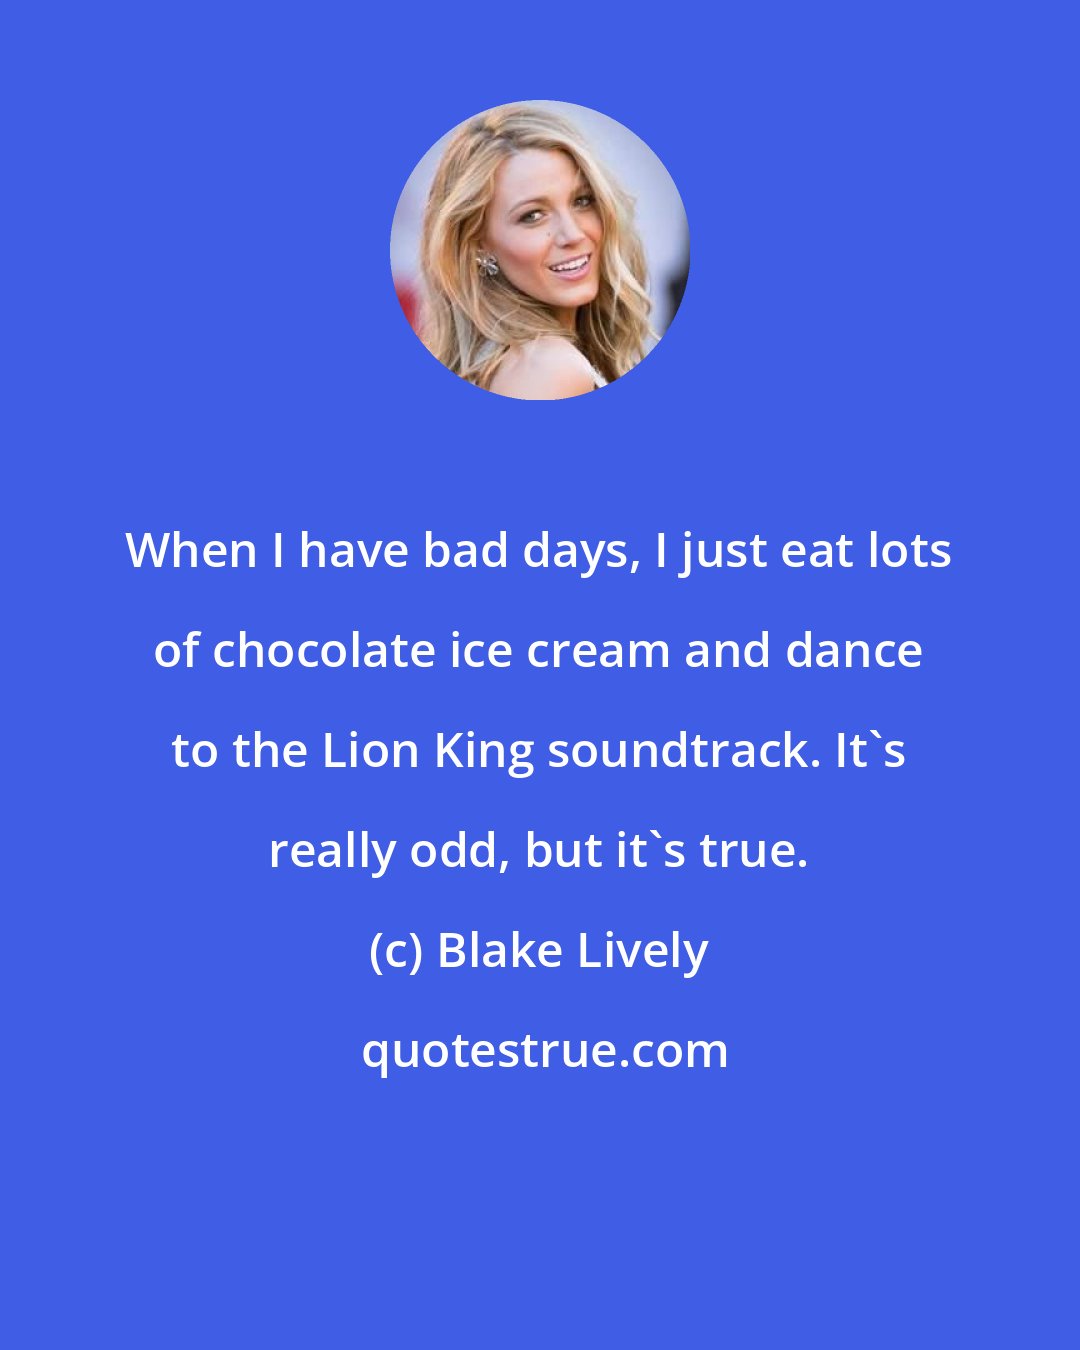 Blake Lively: When I have bad days, I just eat lots of chocolate ice cream and dance to the Lion King soundtrack. It's really odd, but it's true.